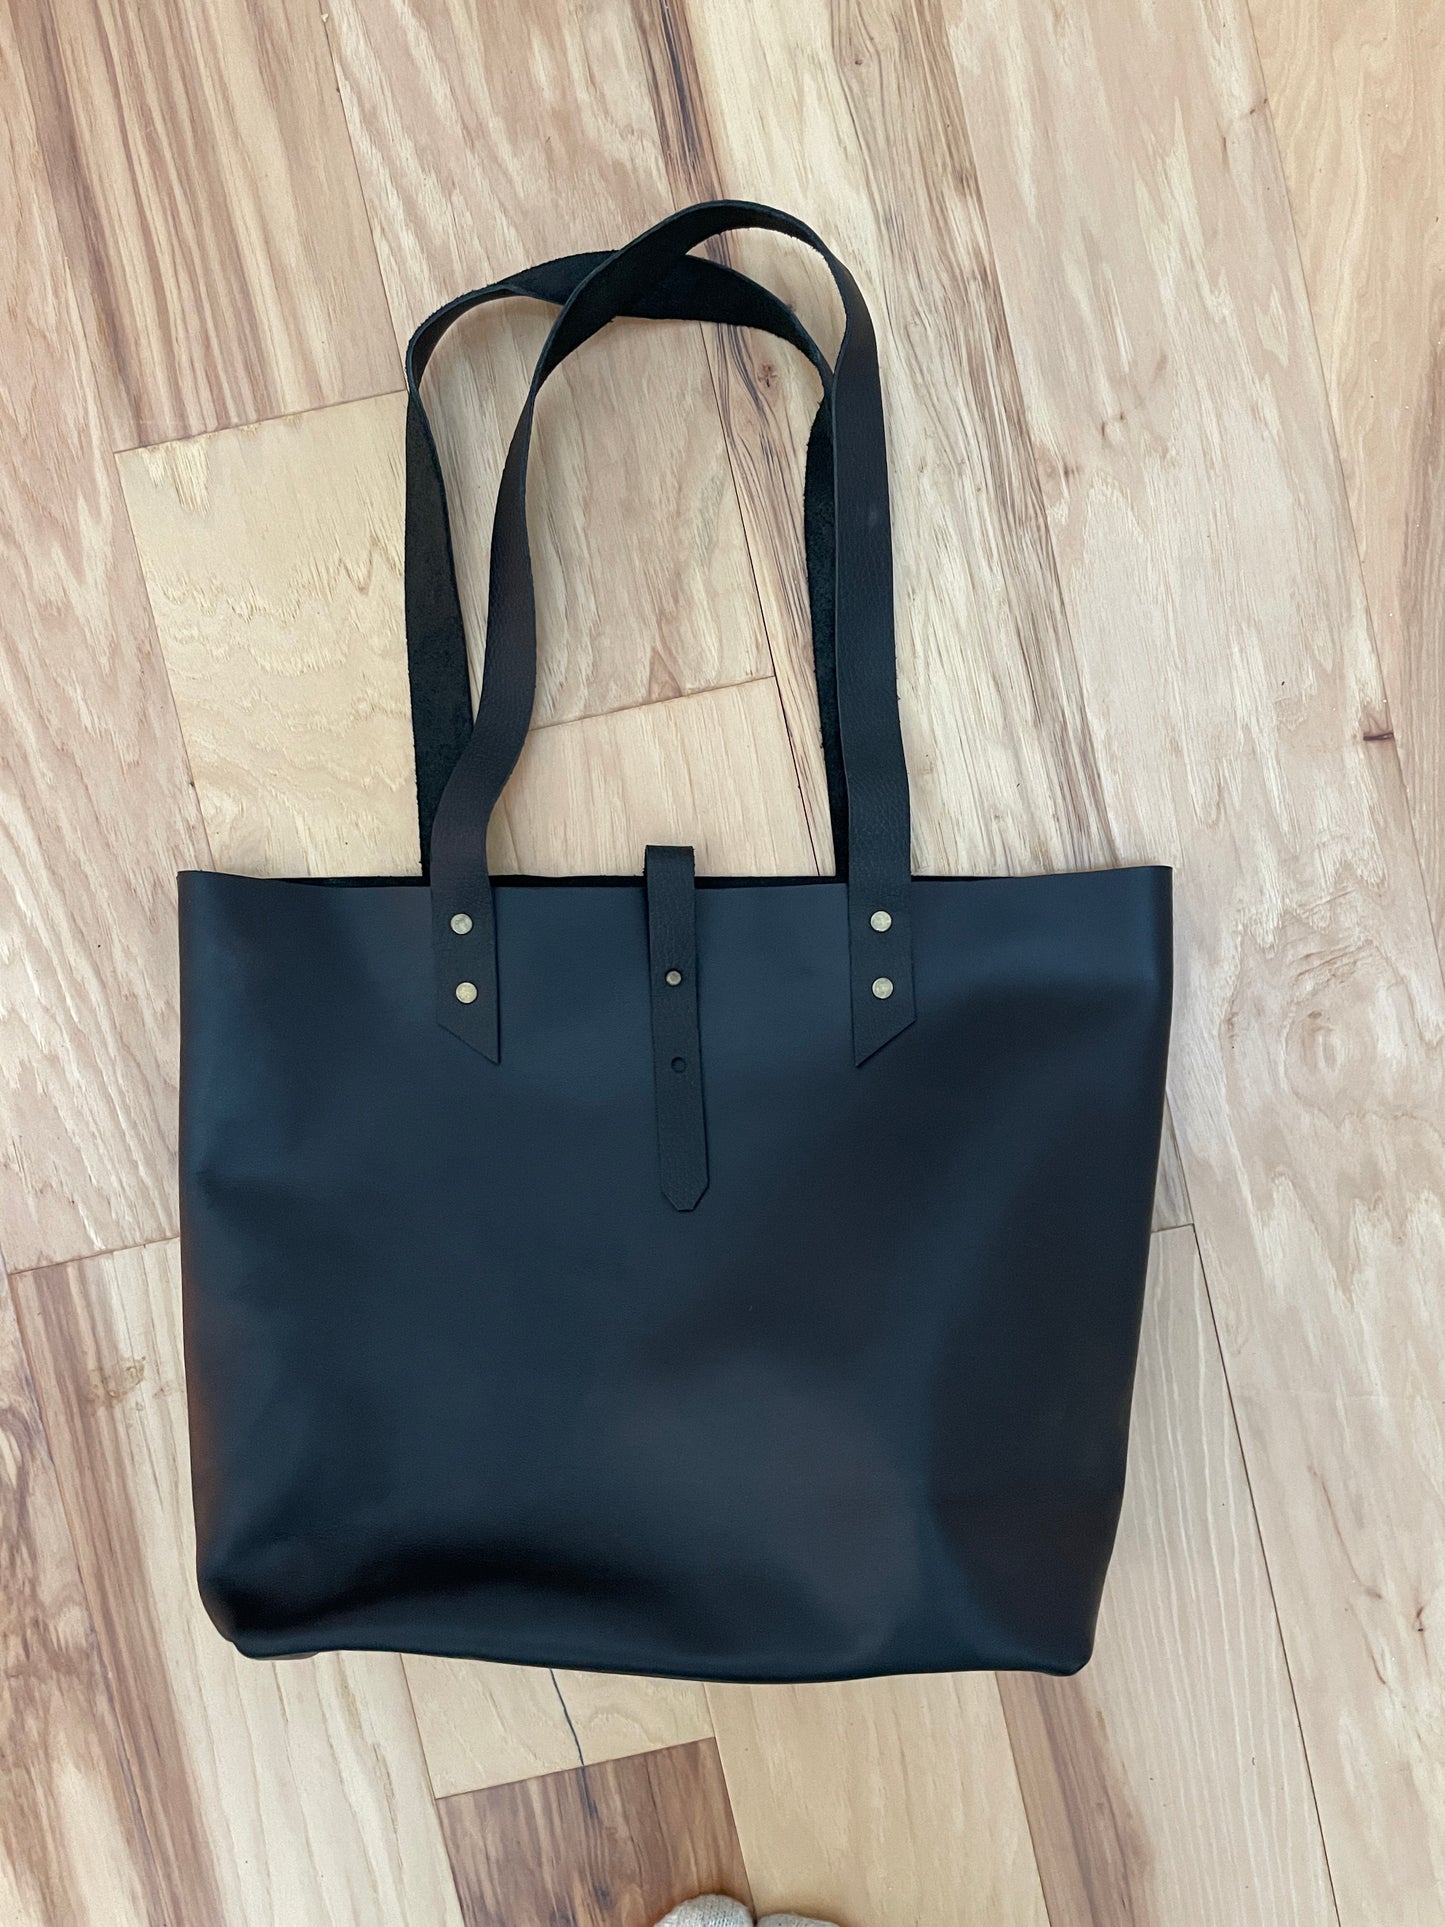 Imperfect: Classic Tote in Black Leather Bag - handcrafted by Market Canvas Leather in Tofino, BC, Canada